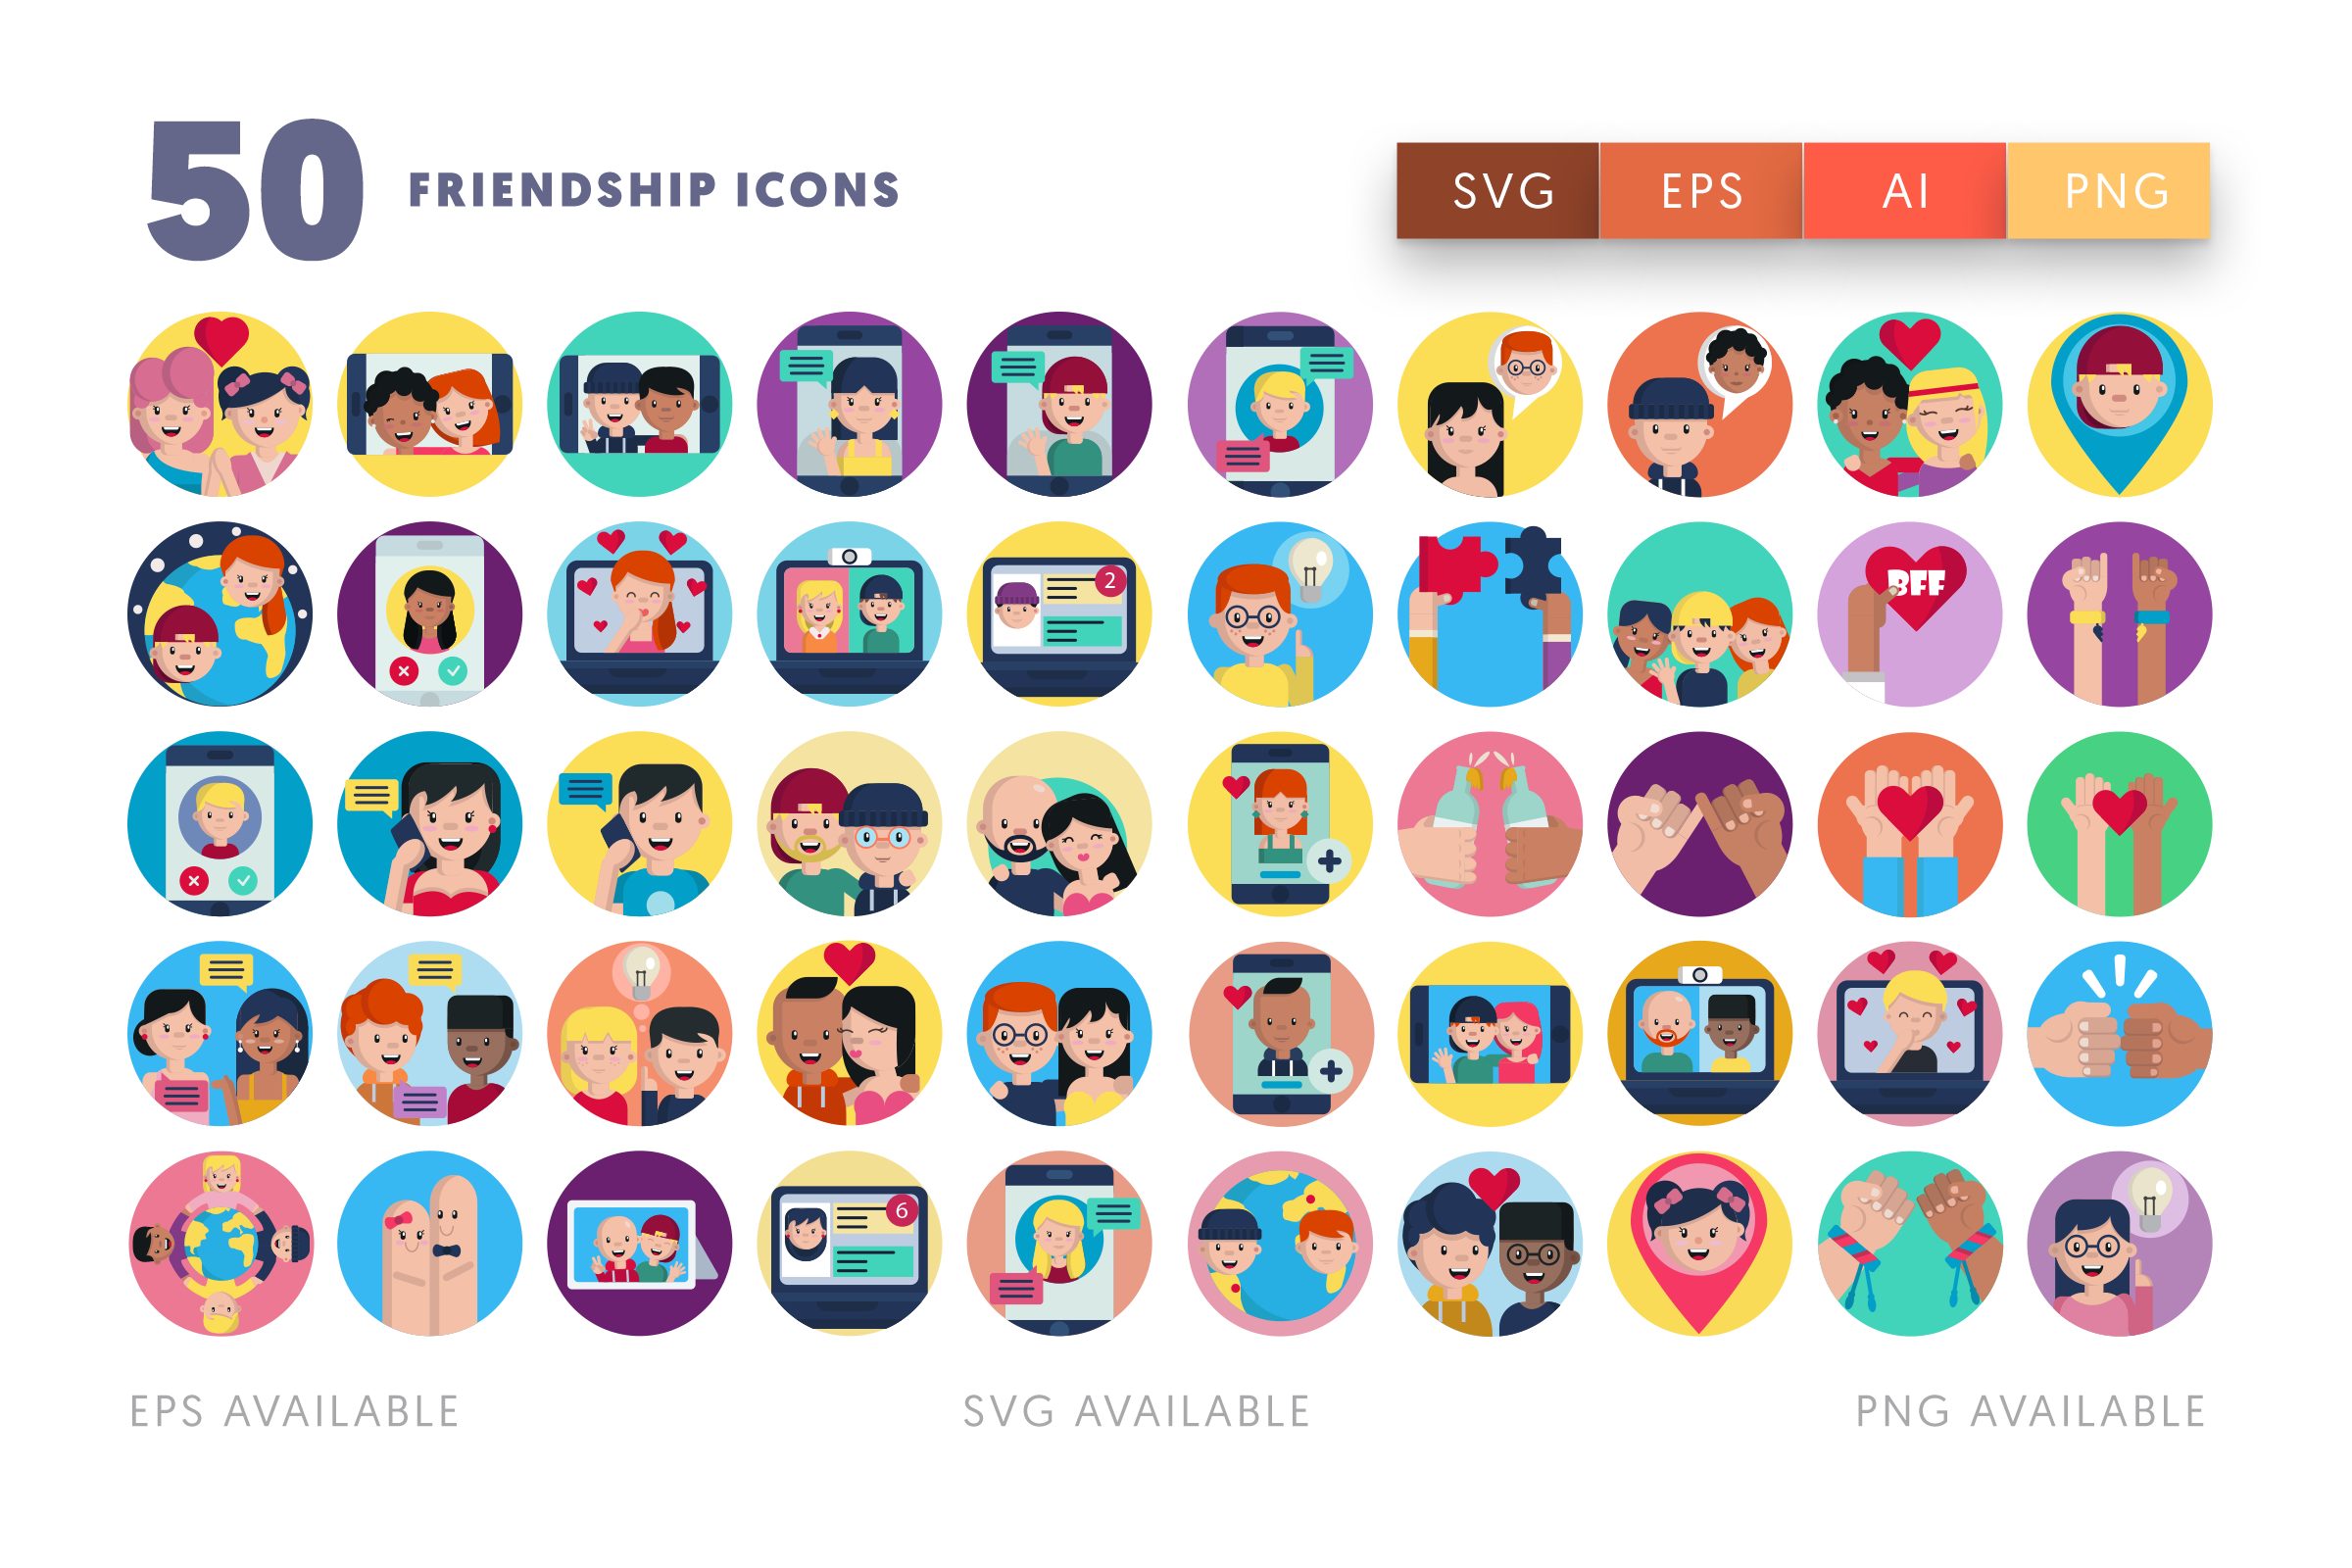 Friendship icons png/svg/eps